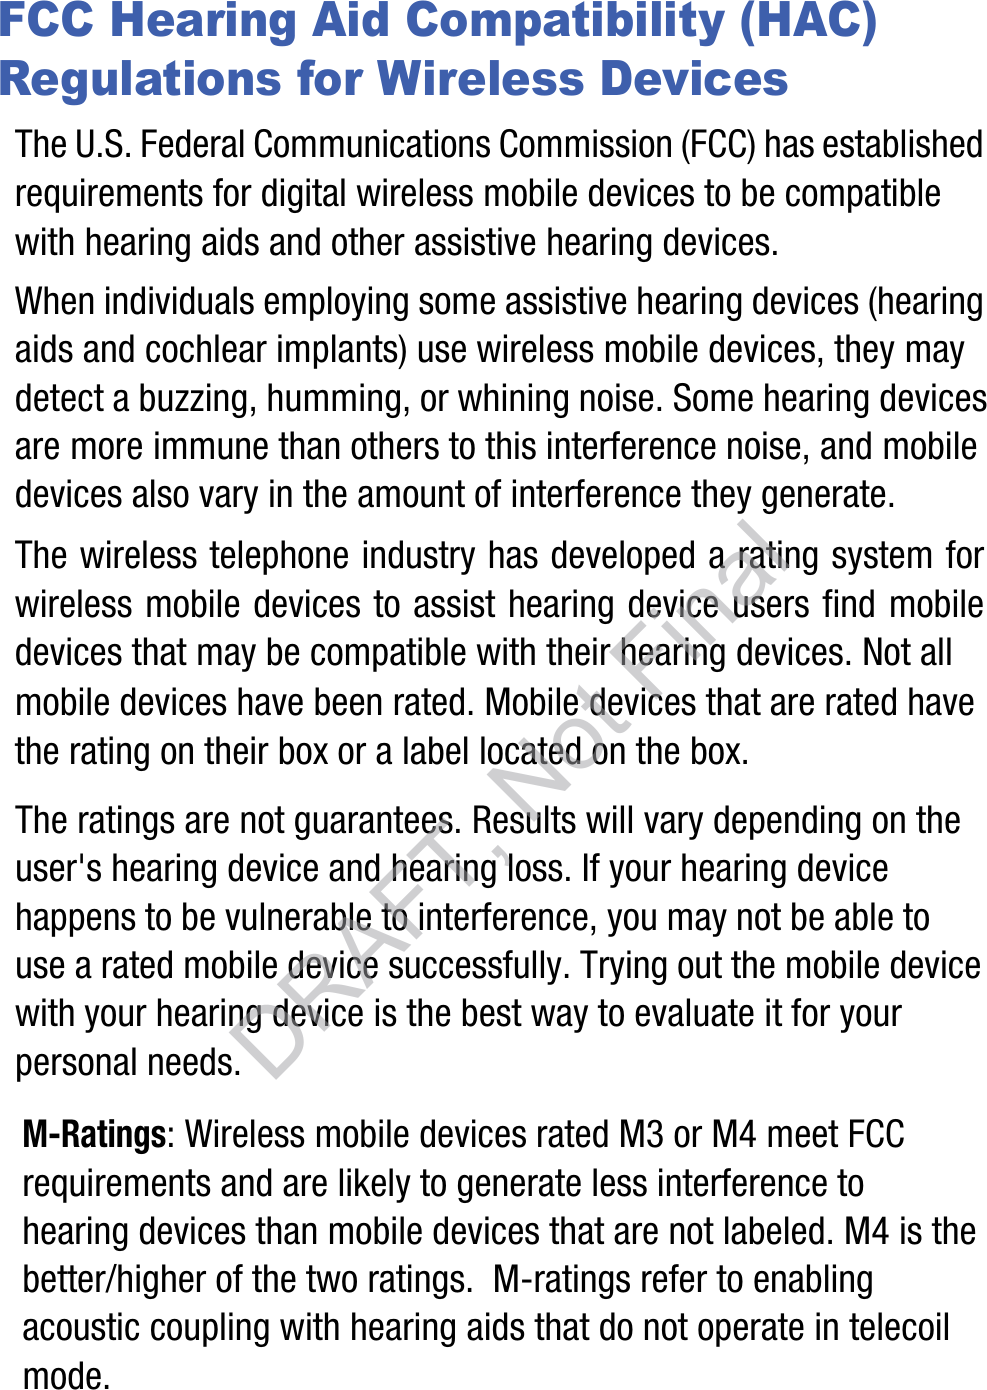 FCC Hearing Aid Compatibility (HAC) Regulations for Wireless DevicesThe U.S. Federal Communications Commission (FCC) has established requirements for digital wireless mobile devices to be compatible with hearing aids and other assistive hearing devices.When individuals employing some assistive hearing devices (hearing aids and cochlear implants) use wireless mobile devices, they may detect a buzzing, humming, or whining noise. Some hearing devices are more immune than others to this interference noise, and mobile devices also vary in the amount of interference they generate.The wireless telephone industry has developed a rating system for wireless mobile devices to assist hearing device users find mobile devices that may be compatible with their hearing devices. Not all mobile devices have been rated. Mobile devices that are rated have the rating on their box or a label located on the box.The ratings are not guarantees. Results will vary depending on the user&apos;s hearing device and hearing loss. If your hearing device happens to be vulnerable to interference, you may not be able to use a rated mobile device successfully. Trying out the mobile device with your hearing device is the best way to evaluate it for your personal needs.M-Ratings: Wireless mobile devices rated M3 or M4 meet FCC requirements and are likely to generate less interference to hearing devices than mobile devices that are not labeled. M4 is the better/higher of the two ratings.  M-ratings refer to enabling acoustic coupling with hearing aids that do not operate in telecoil mode.DRAFT, Not Final